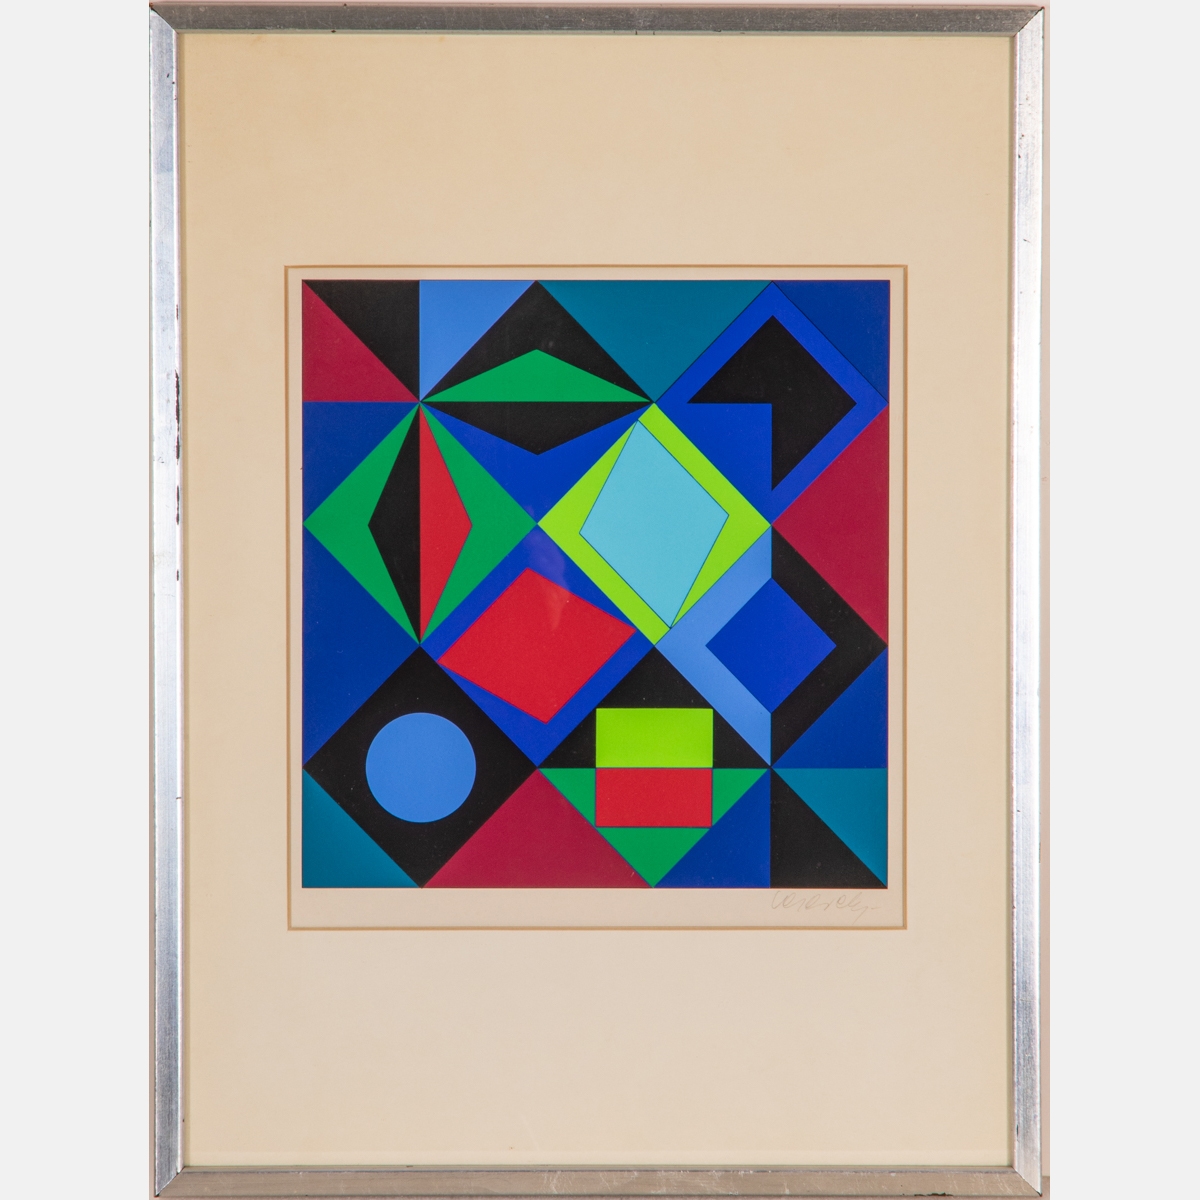 Sikra-M.C. by Victor Vasarely, 1968